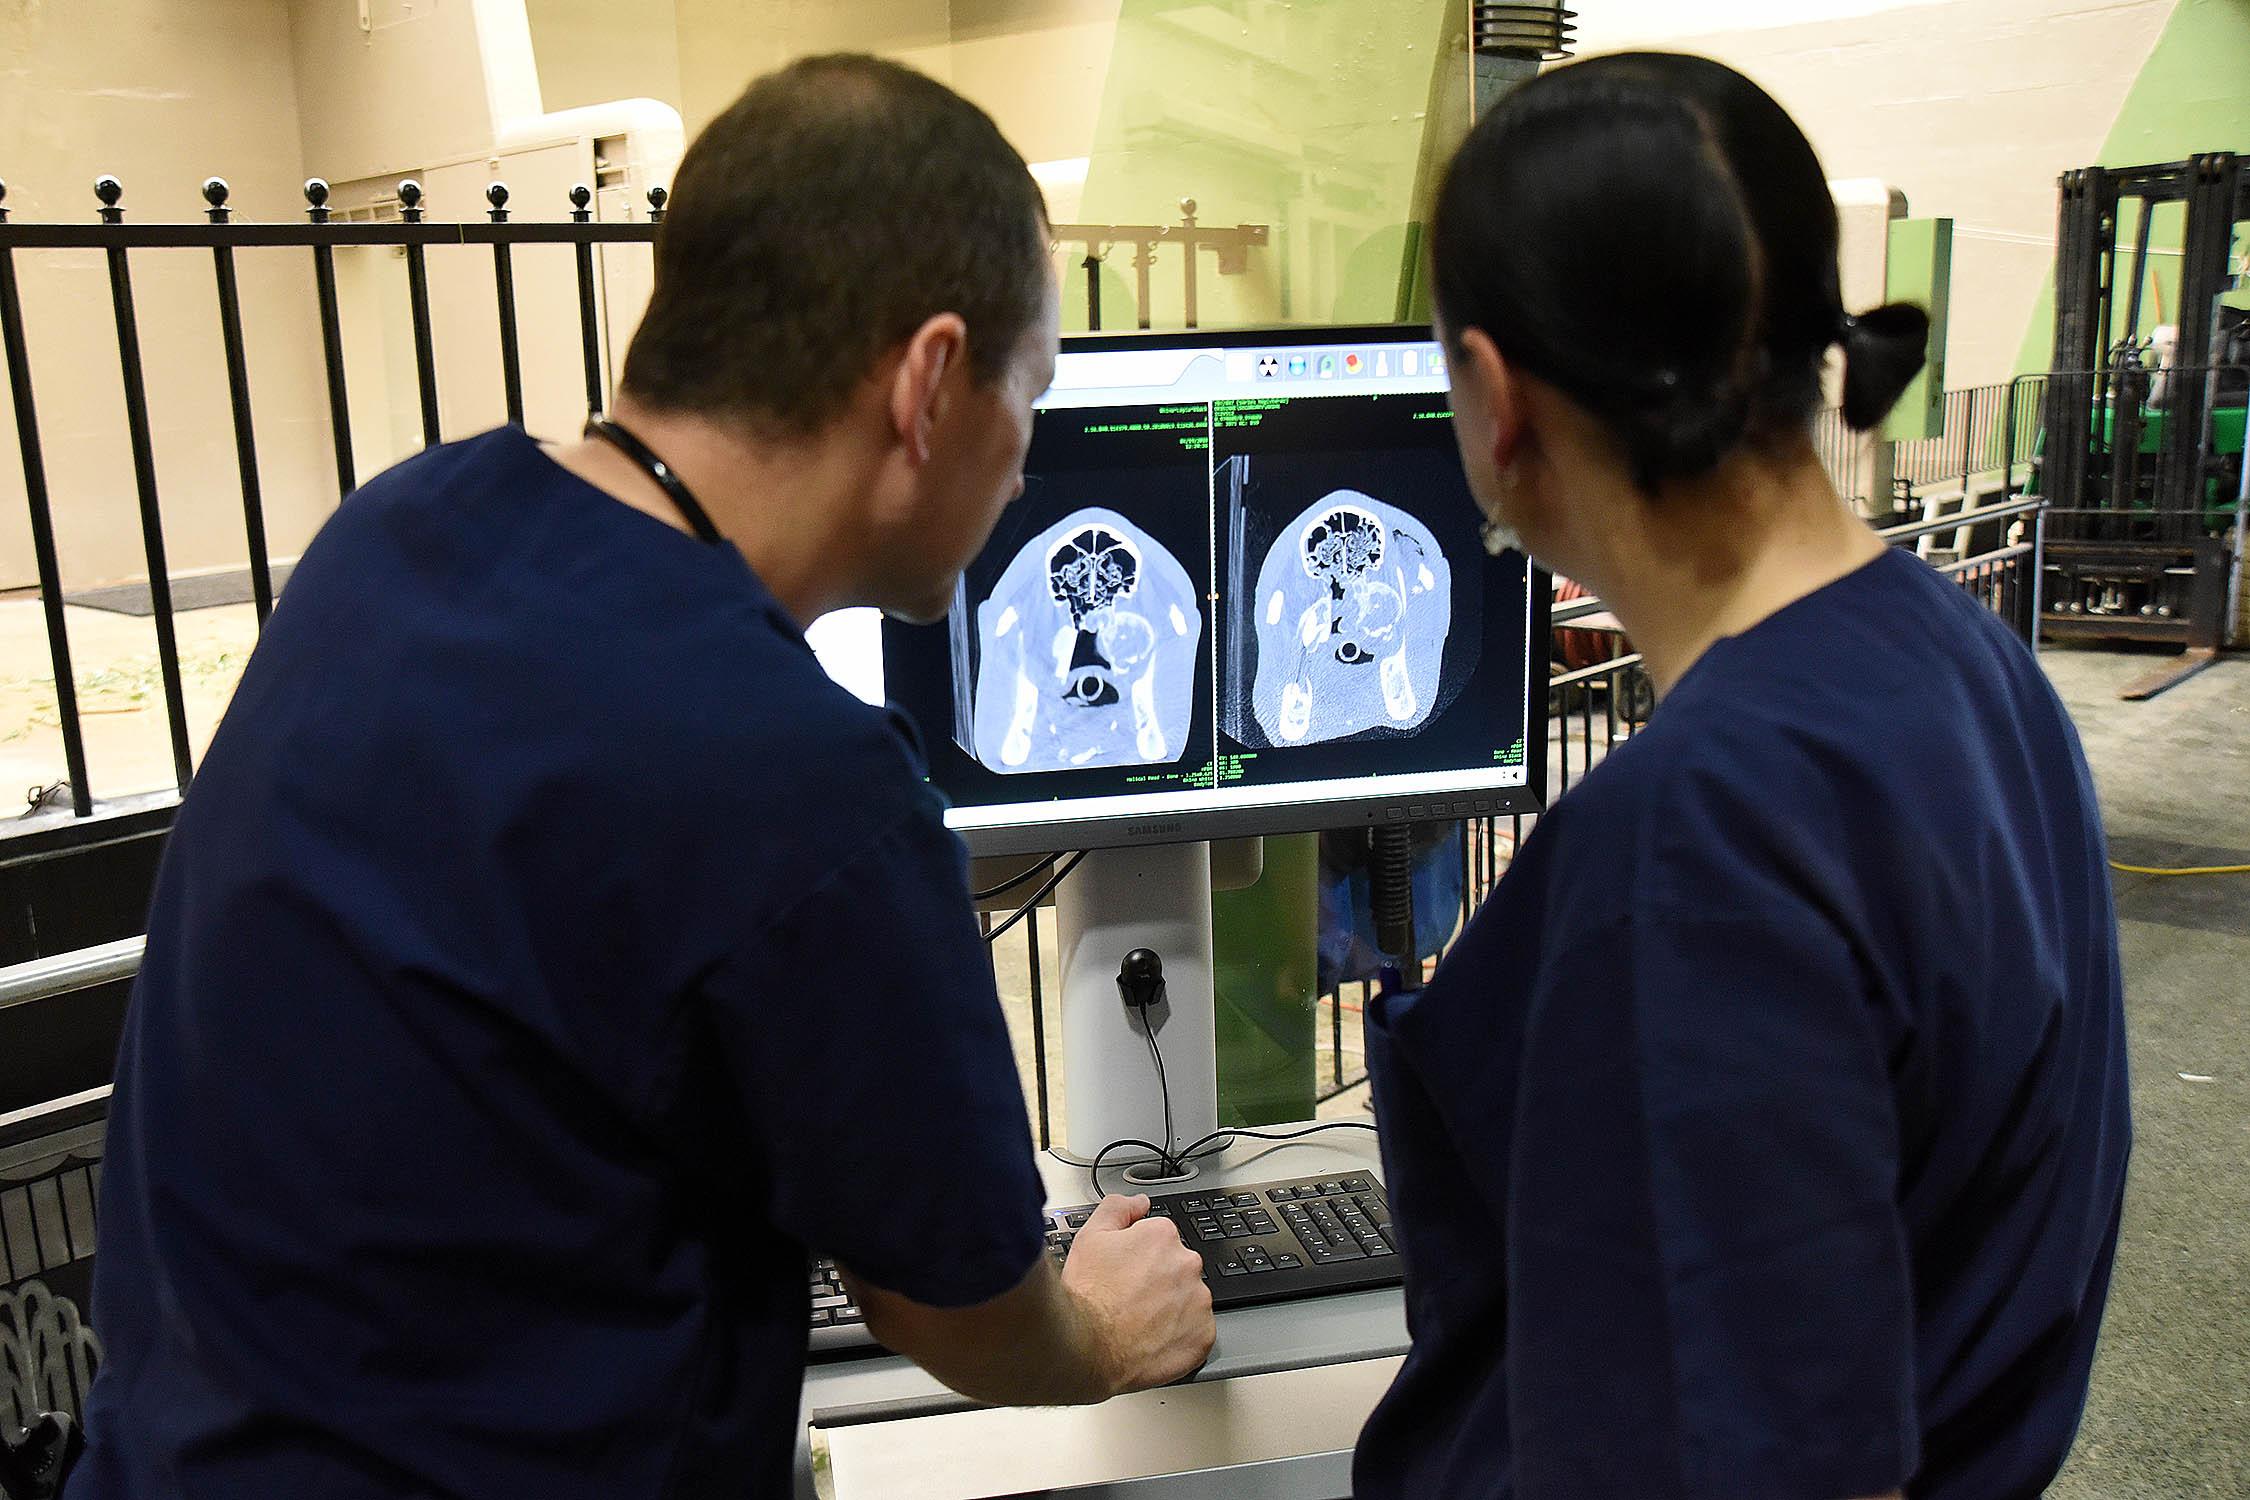 Dr. Michael Adkesson, vice president of clinical medicine for the Chicago Zoological Society, and Dr. Marina Ivančić,a veterinary radiologist for CZS, compare a CT scan image taken on April 19 (left) with one taken May 15 of Layla, a 7.5-year-old eastern black rhinoceros. (Jim Schulz / Chicago Zoological Society)